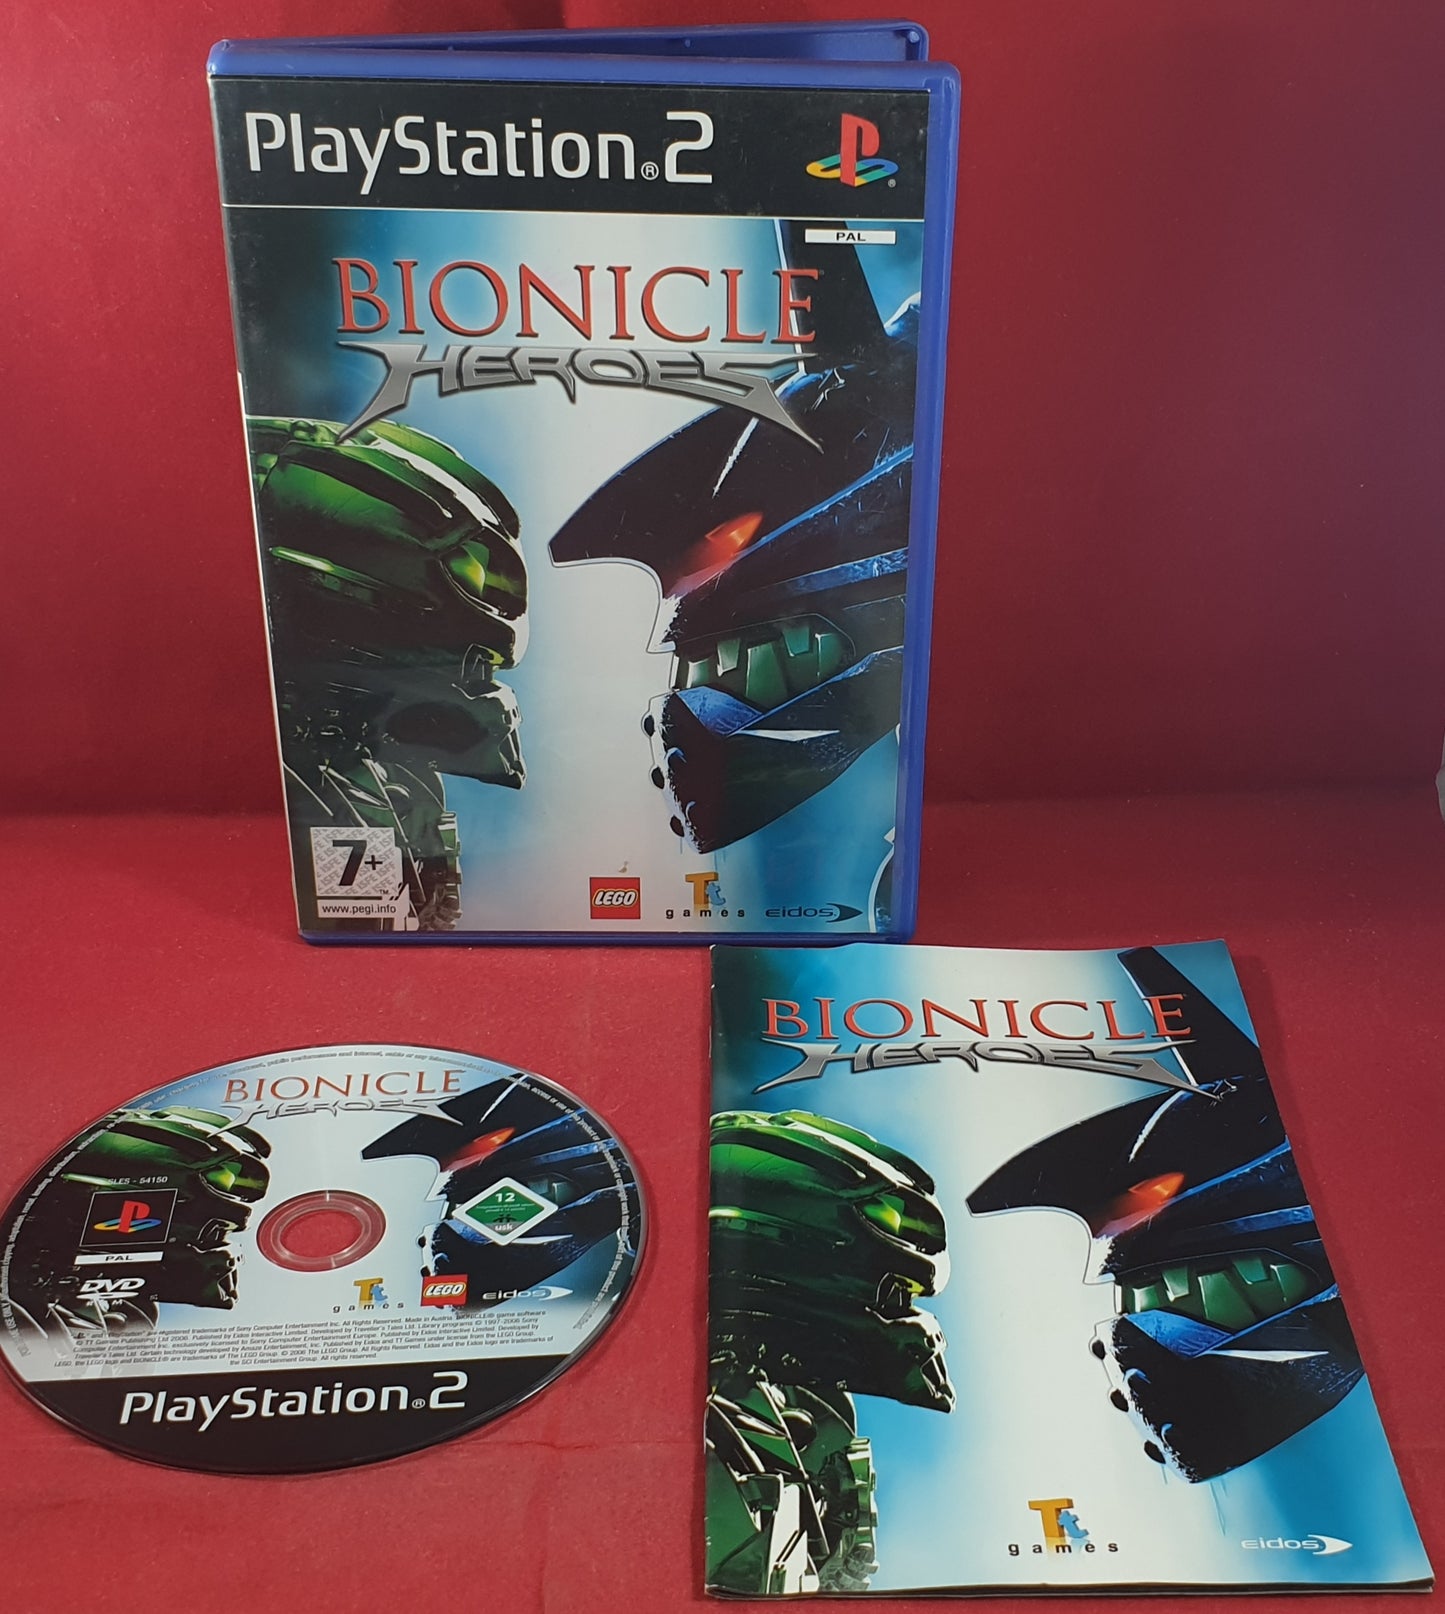 Bionicle Heroes Sony Playstation 2 (PS2) Game